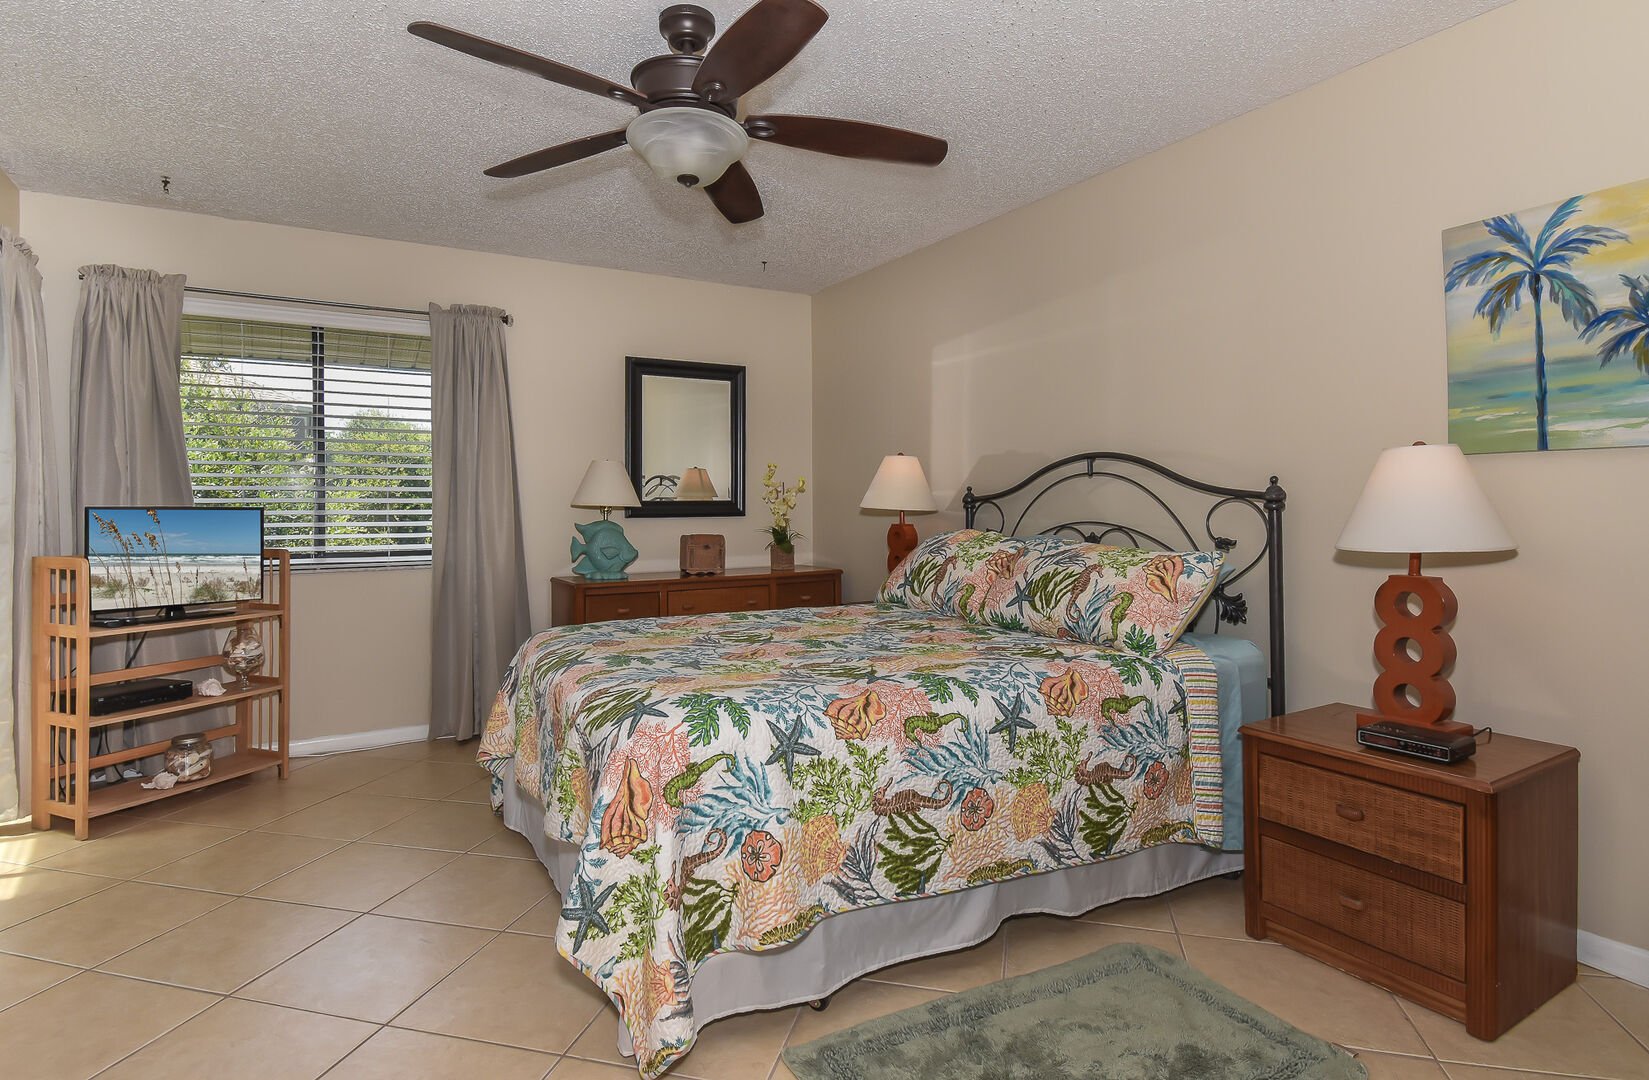 The spacious master bedroom features a king size bed, flat screen TV and sliders to the patio.